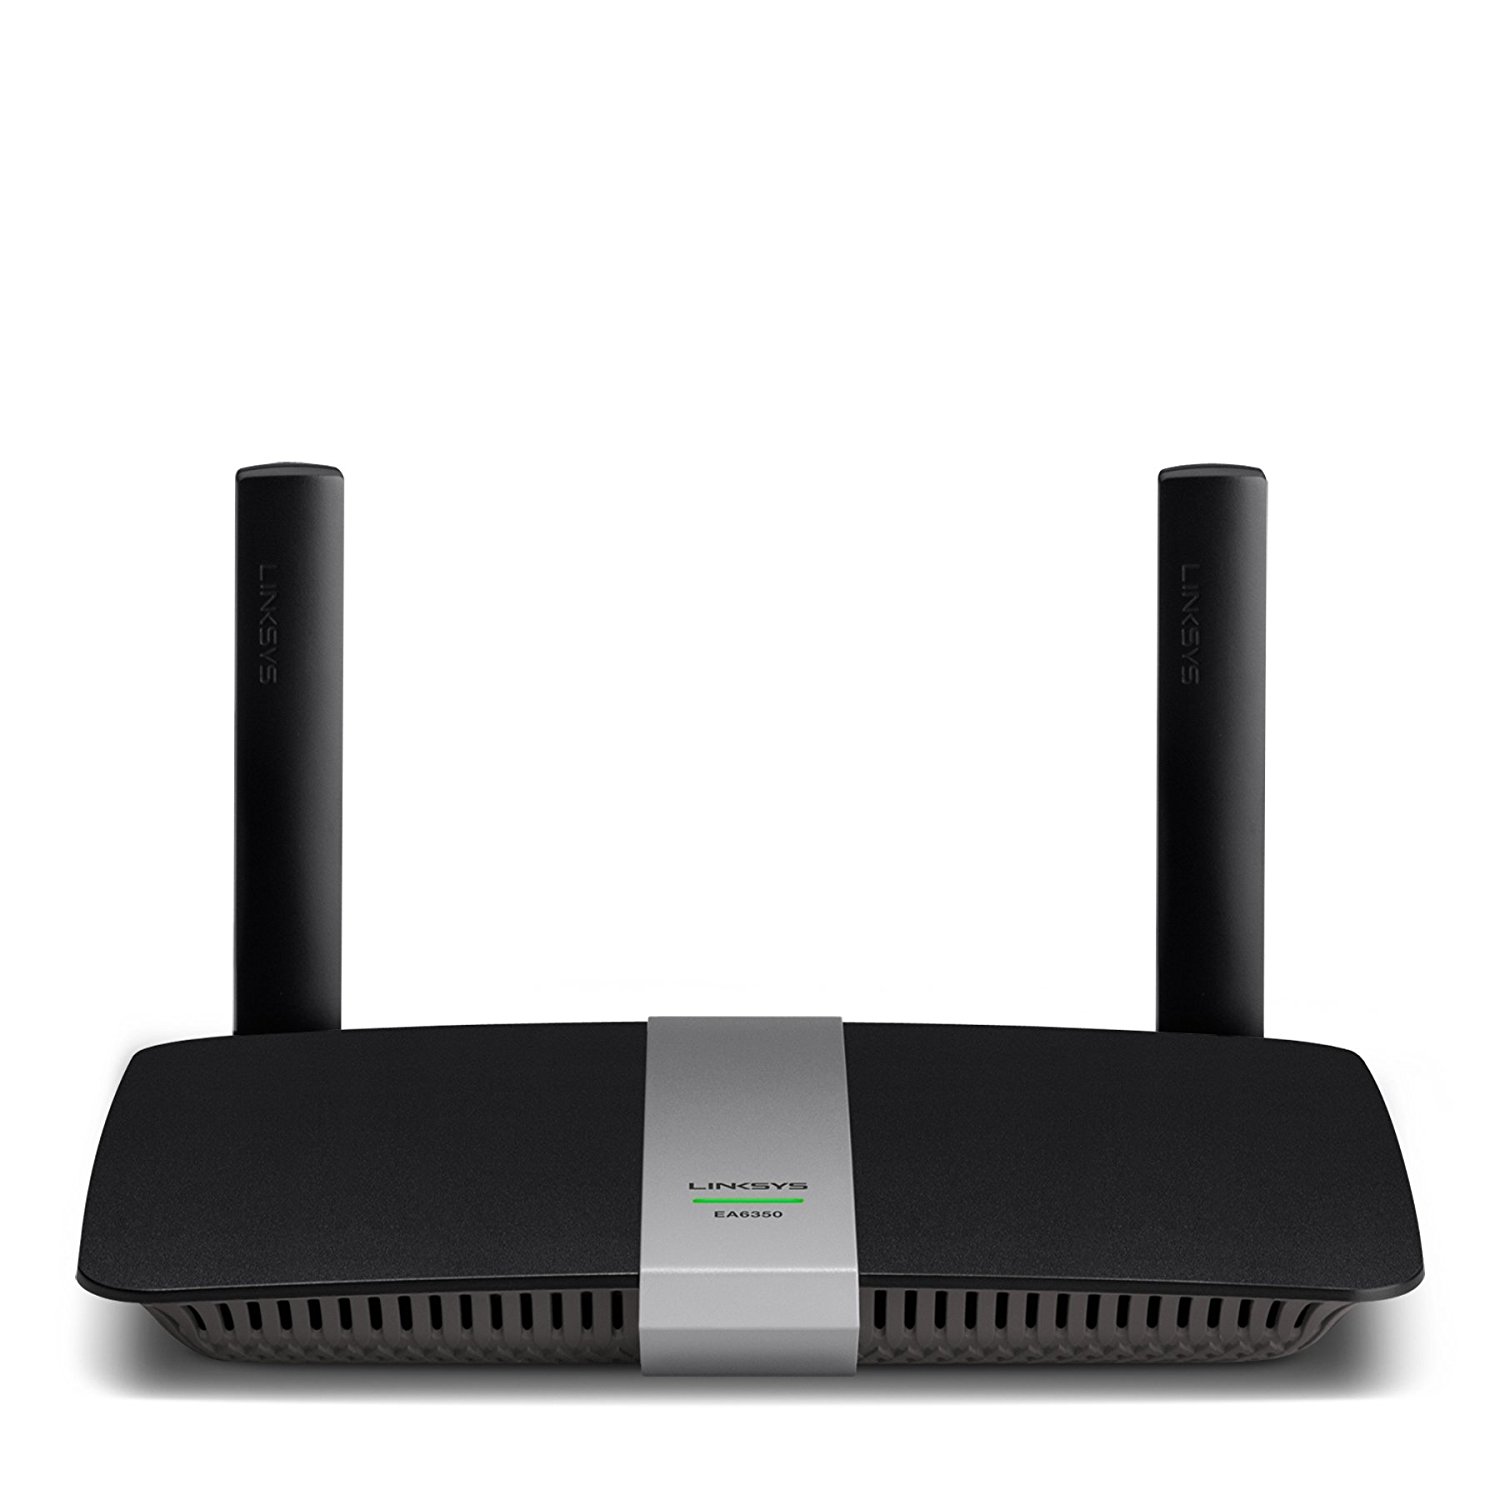 Linksys EA6350 AC1200+ Dual-Band Wireless Router (Black)